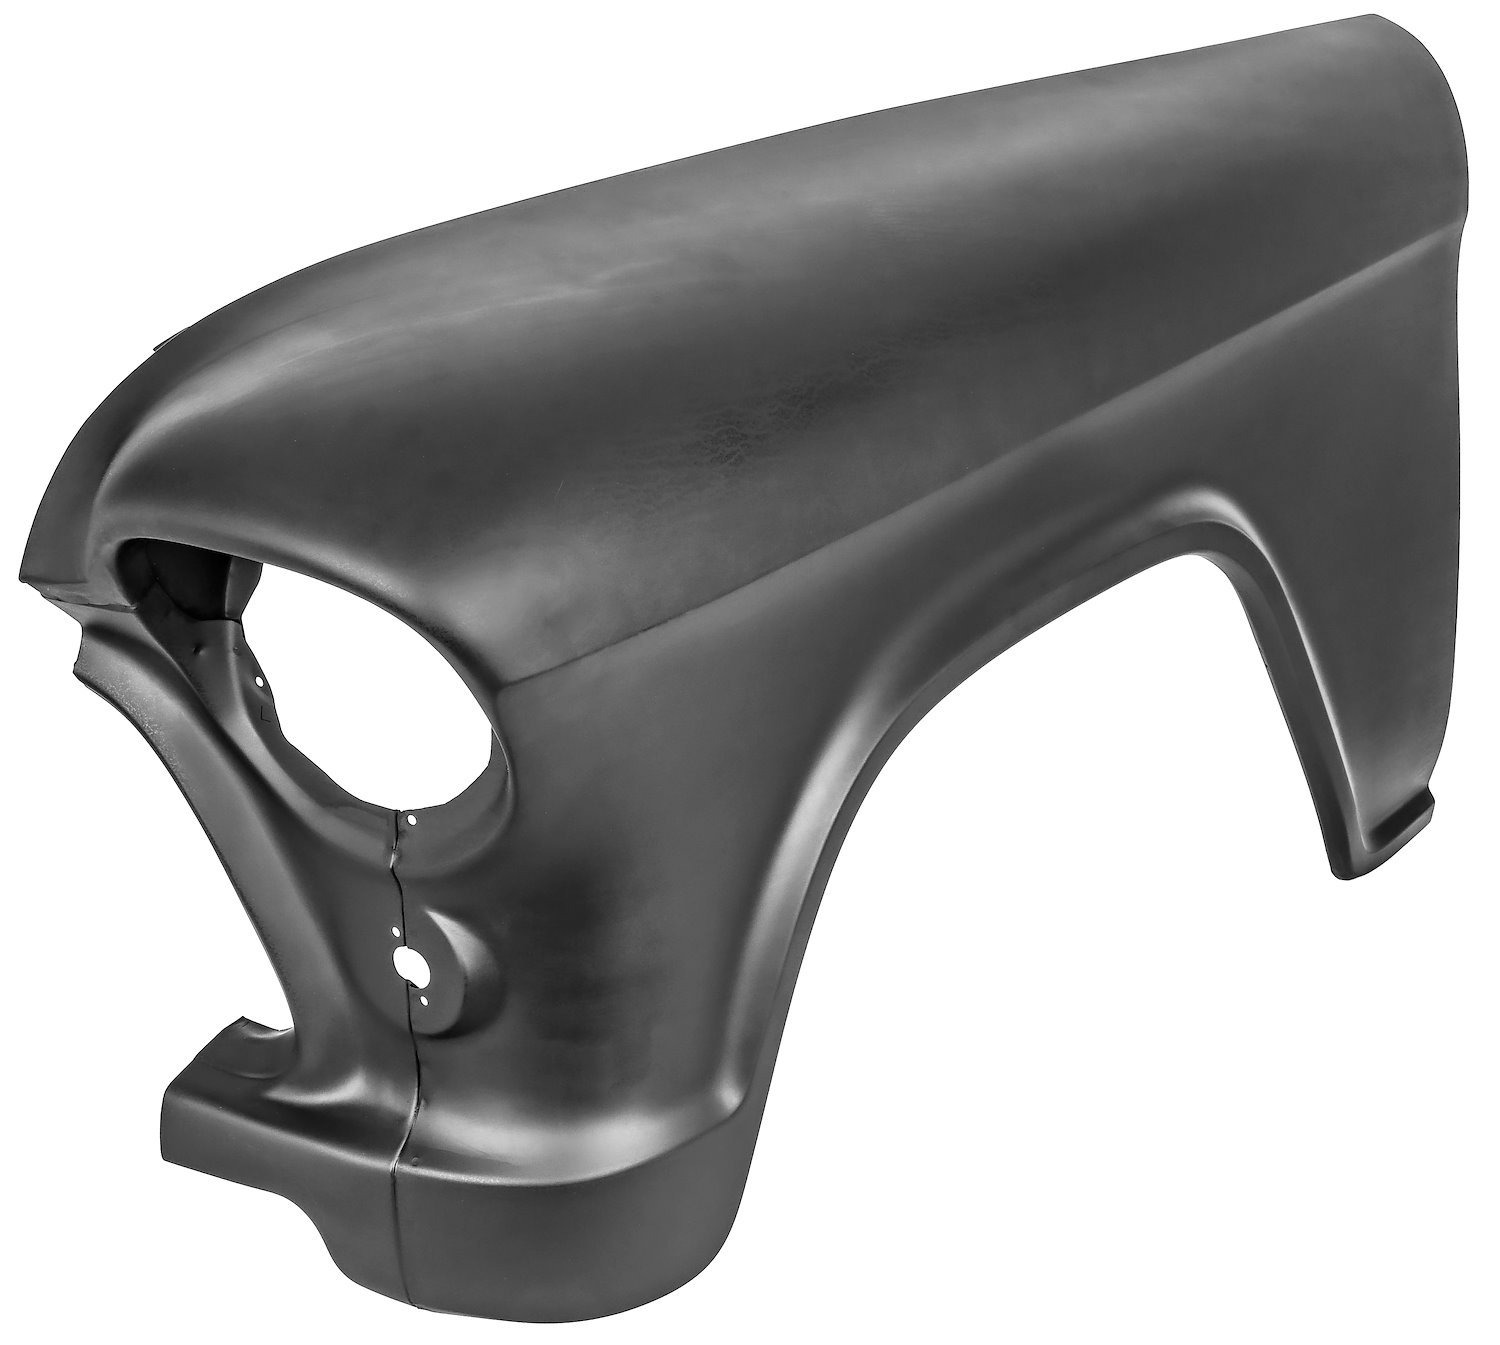 Front Fender for 1955-1956 Chevrolet and GMC Truck, Suburban [Left/Driver Side]